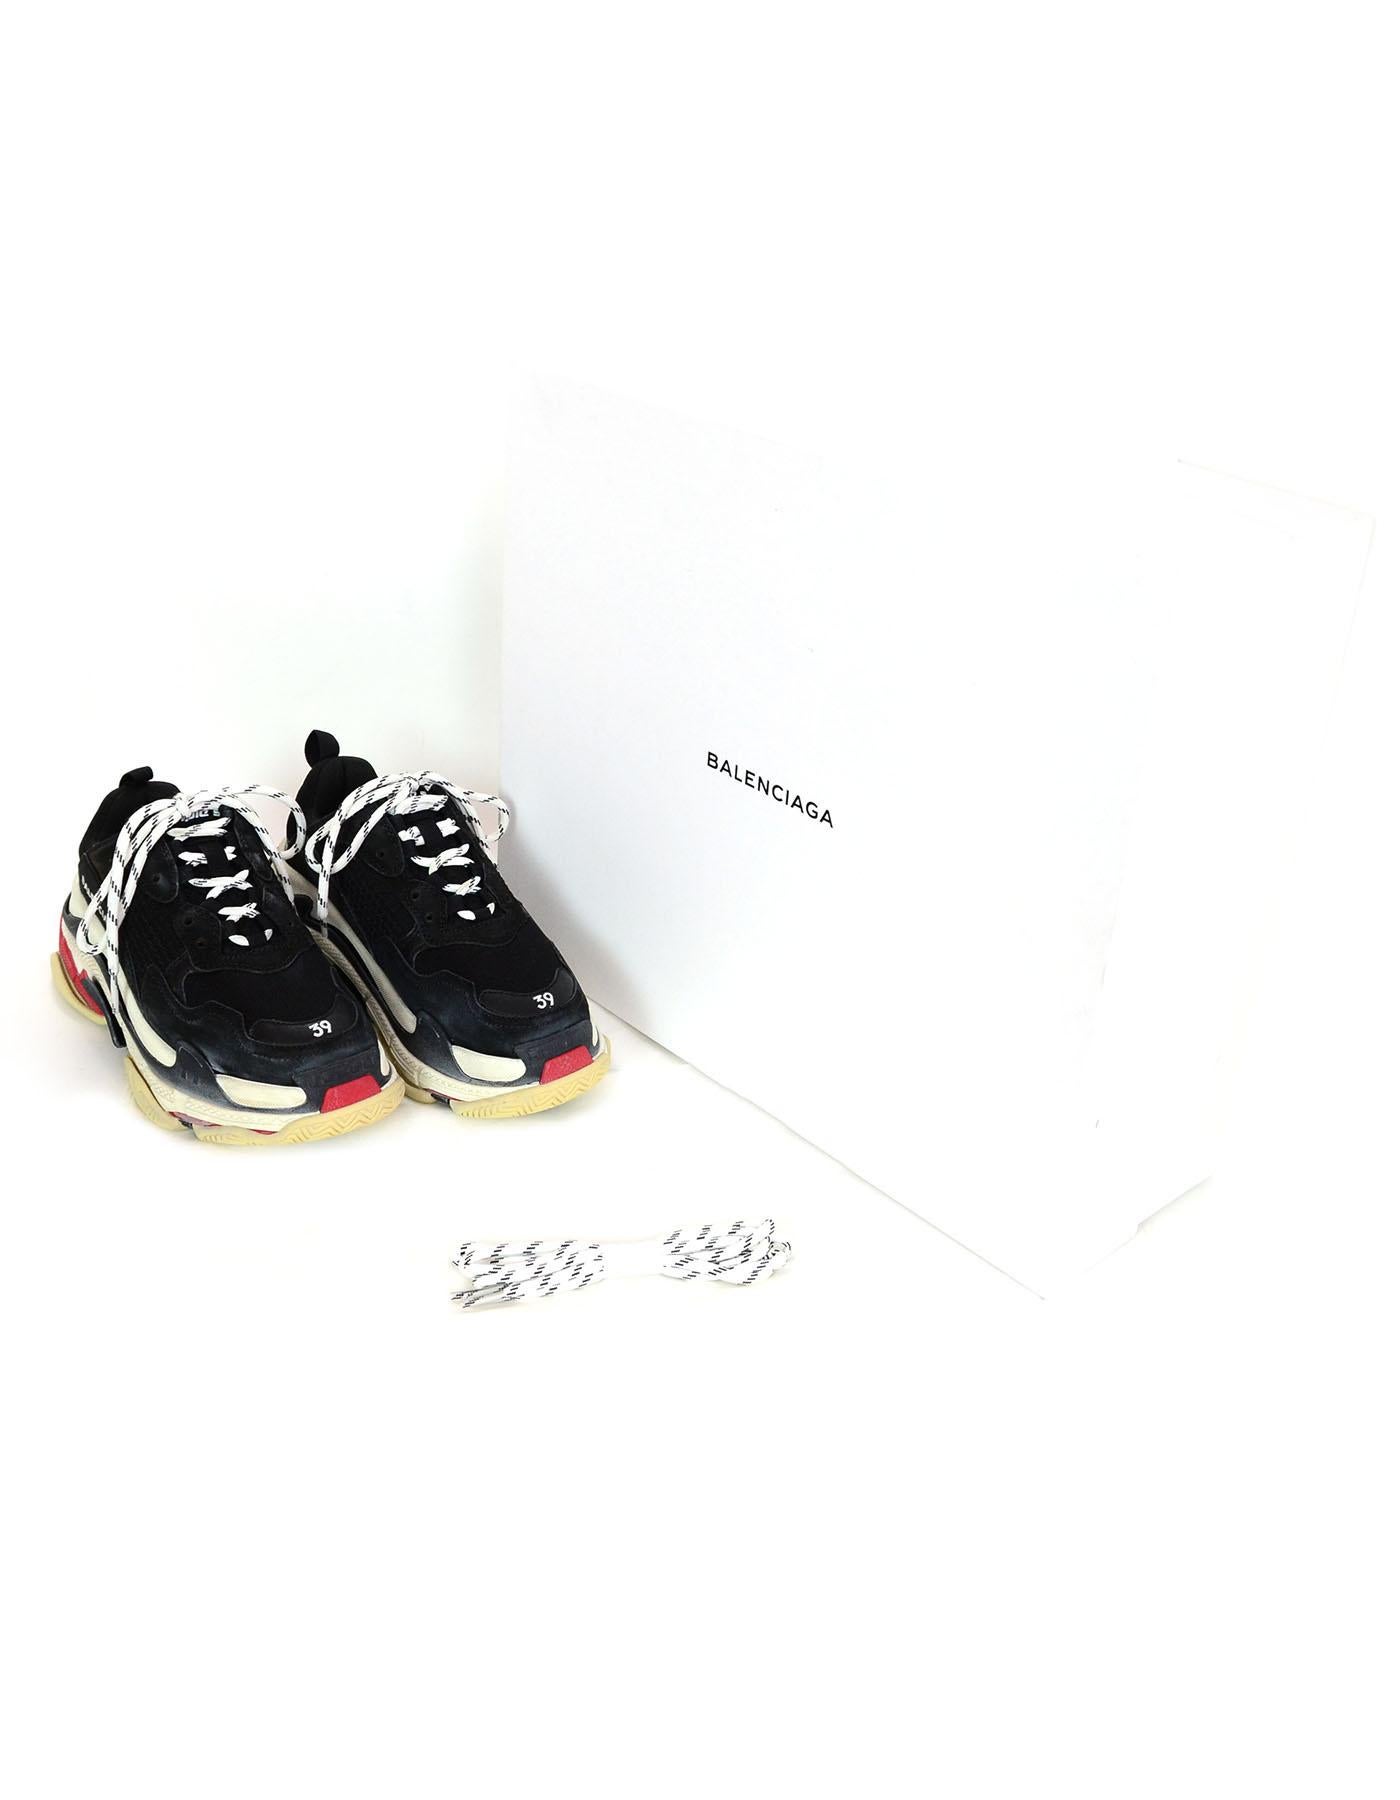 Balenciaga Black/Red Triple S Trainers sz 39
American style oversized sneakers with washed vintage effect

Made In: Italy
Color: Red/black/white 
Materials: Nubuck and meshes- 60% Polyester, 25% Calfskin, 15% Lambskin
Closure/Opening: Lace up
Sole